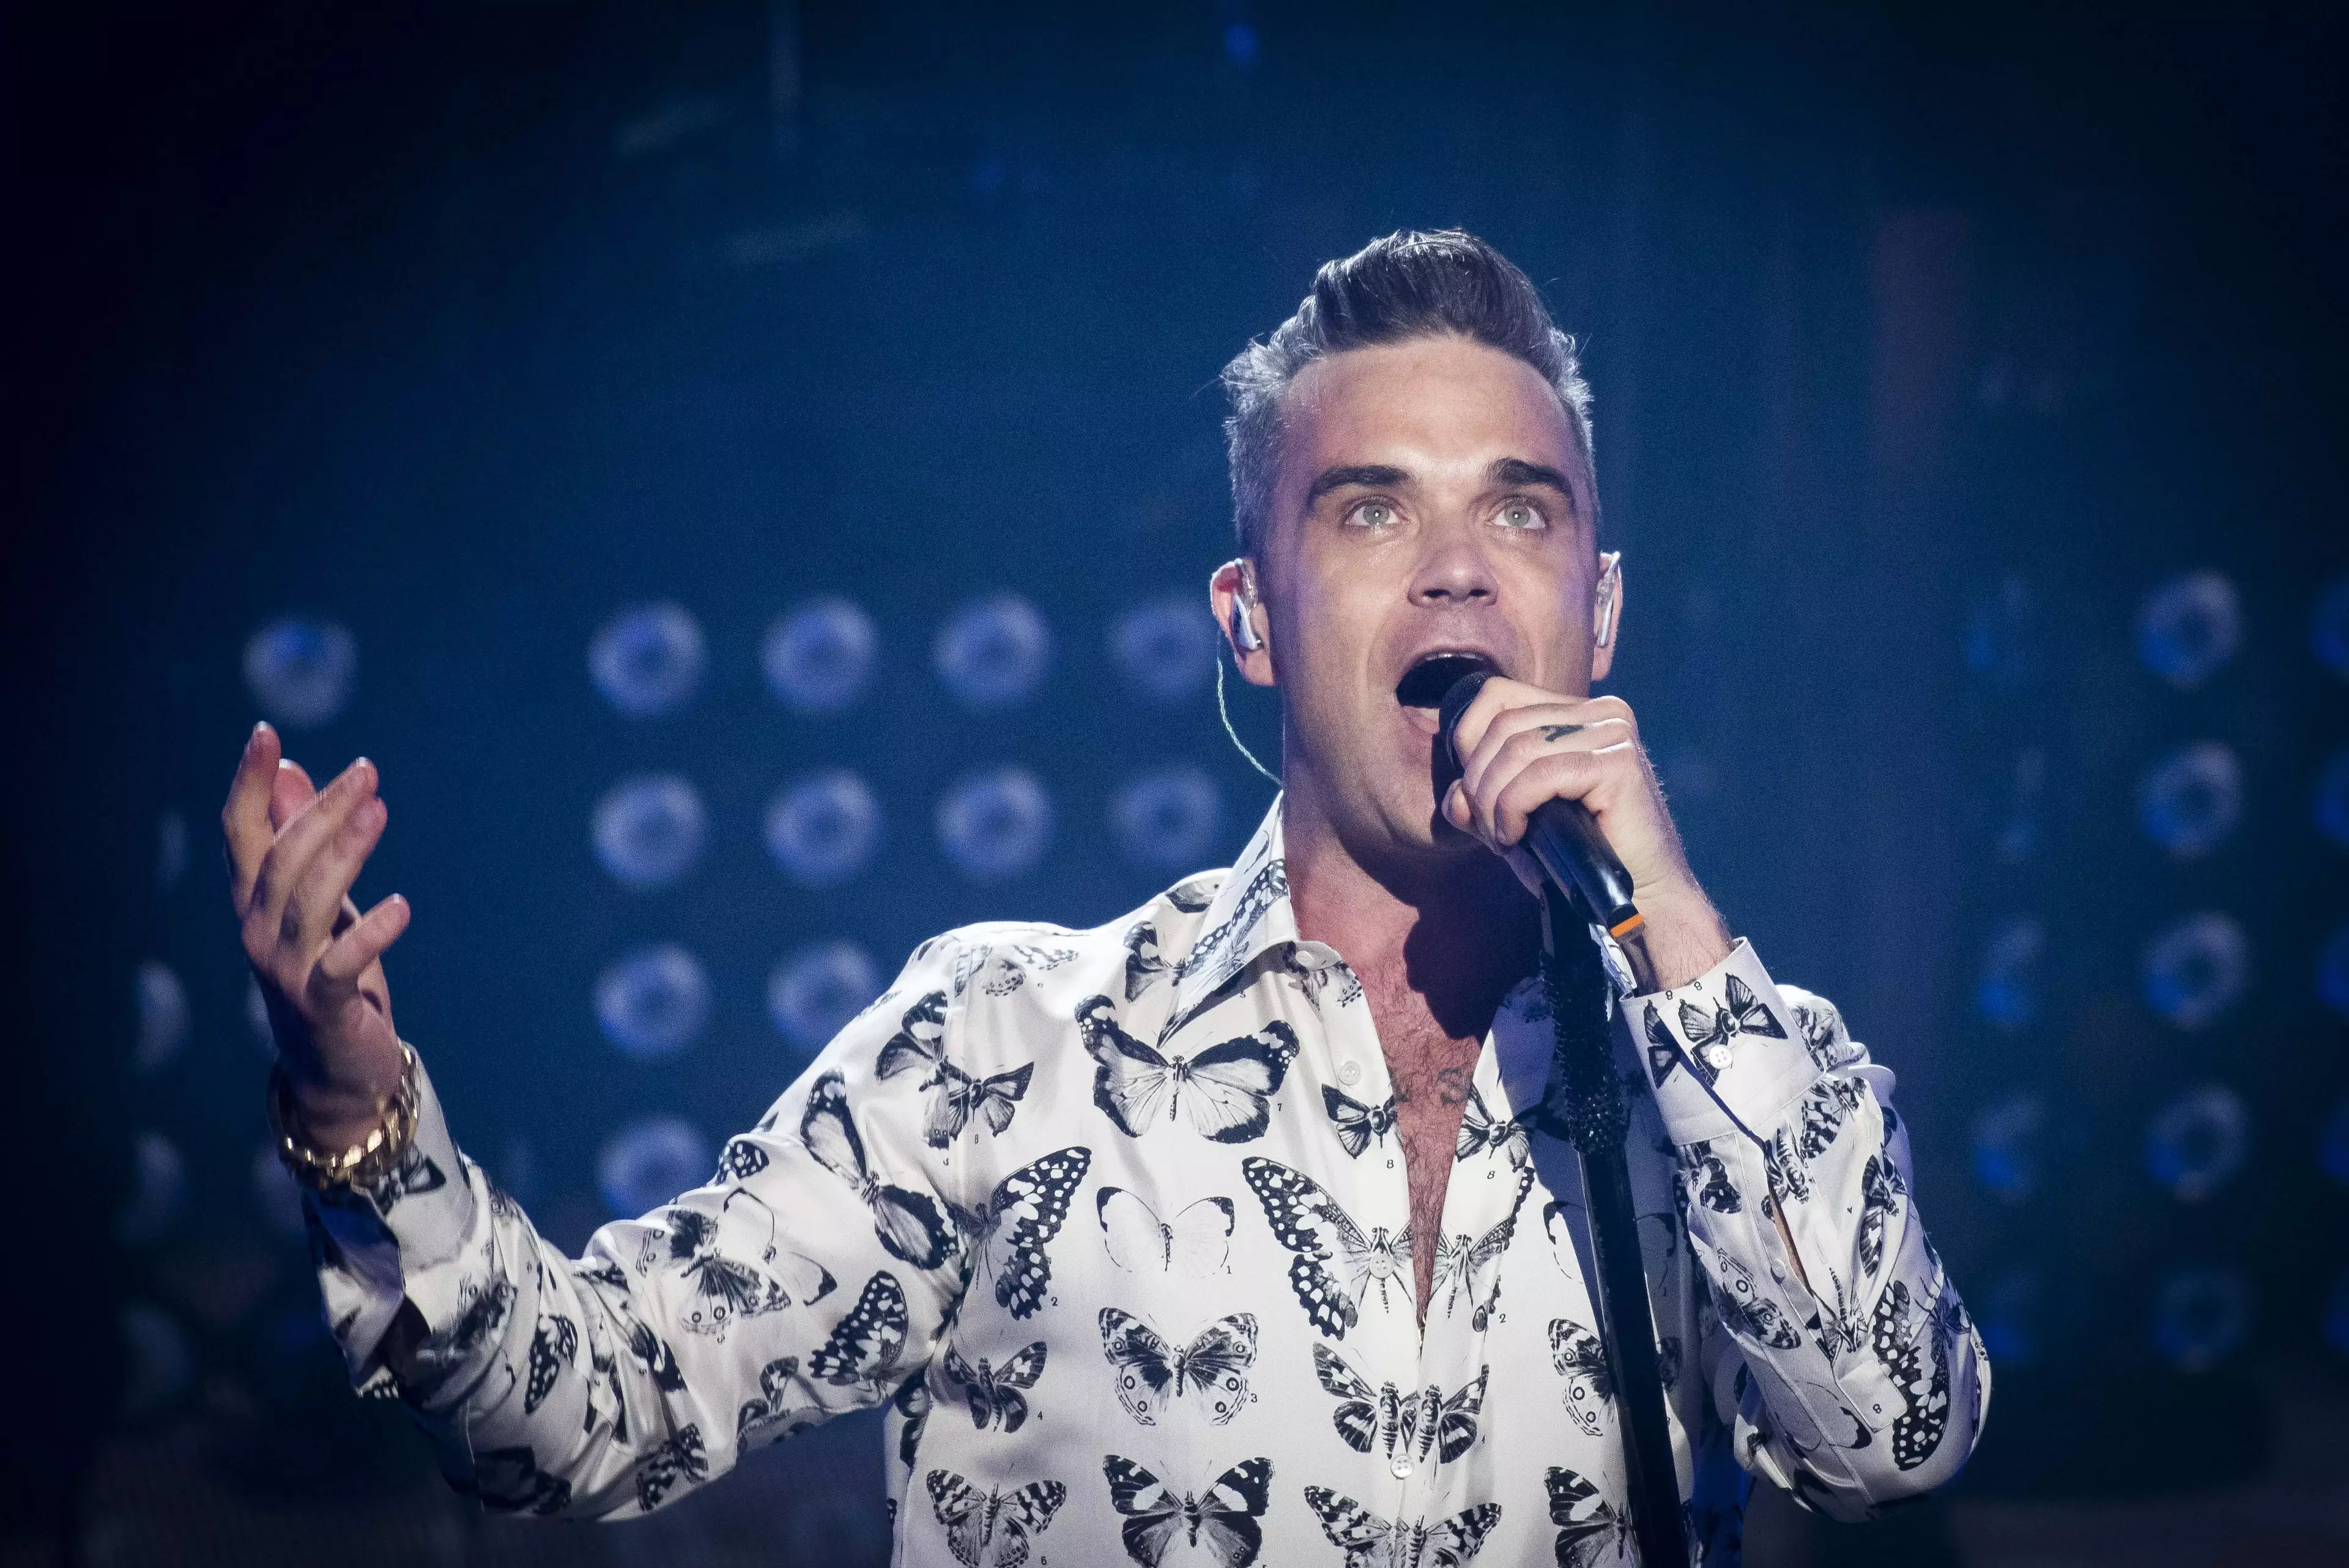 Remember The Time Robbie Williams Shared This Hand-Job Story?